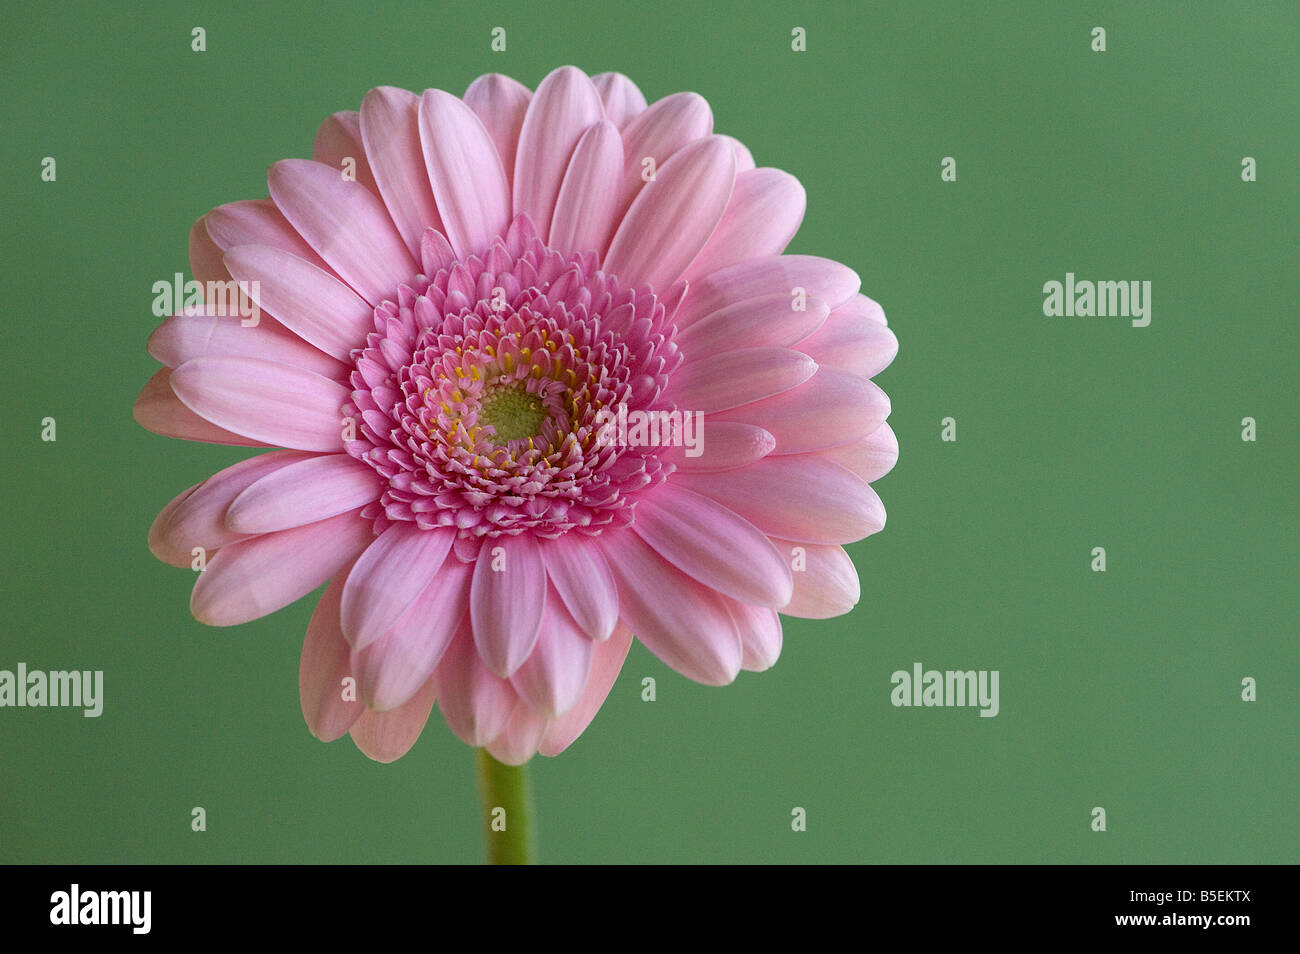 Pink gerbera showing radial symmetry disc and ray florets typical of daisy family Stock Photo